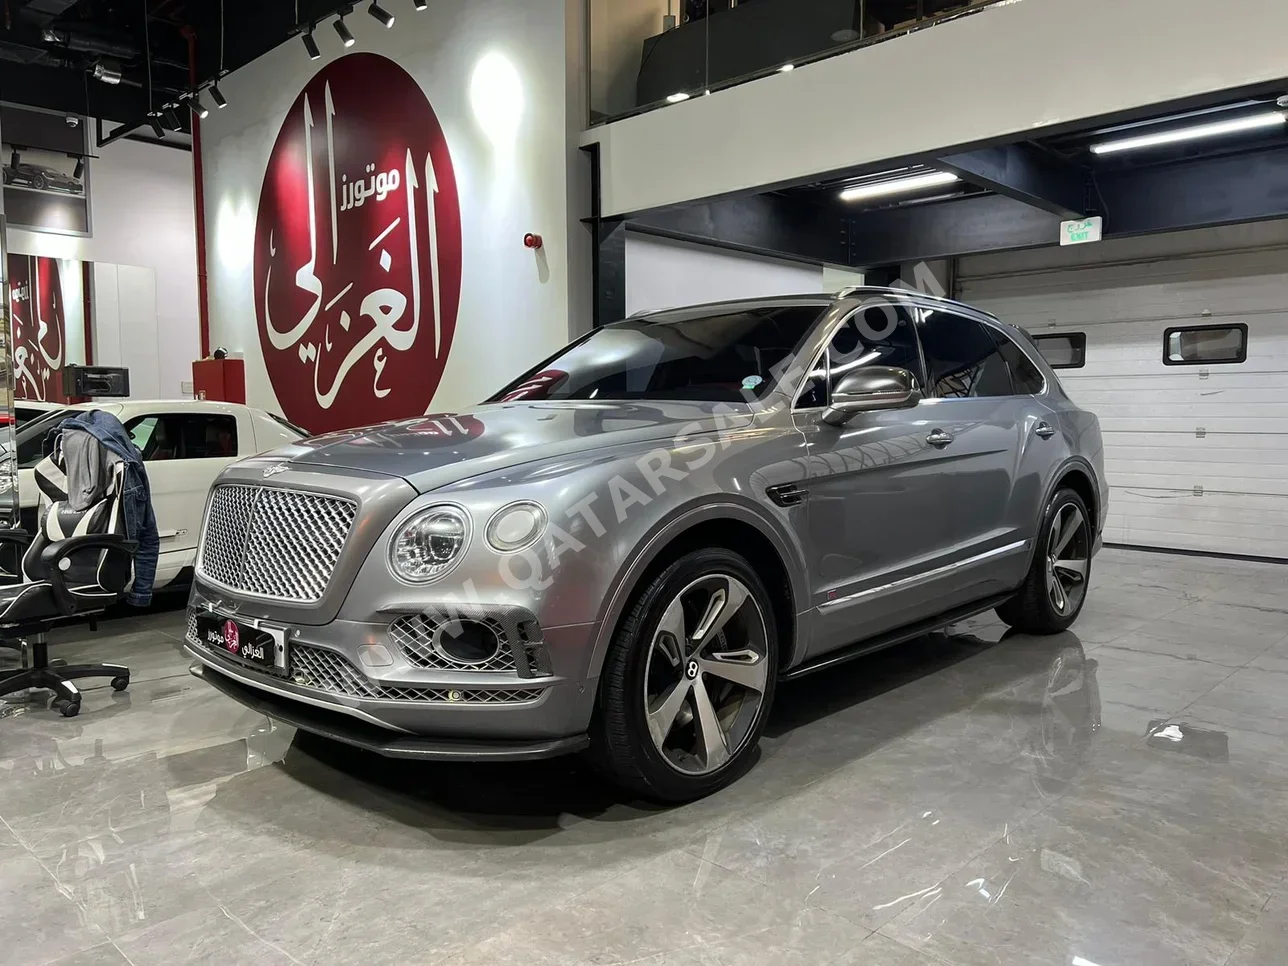 Bentley  Bentayga  First Edition  2017  Automatic  127,000 Km  12 Cylinder  Four Wheel Drive (4WD)  SUV  Gray